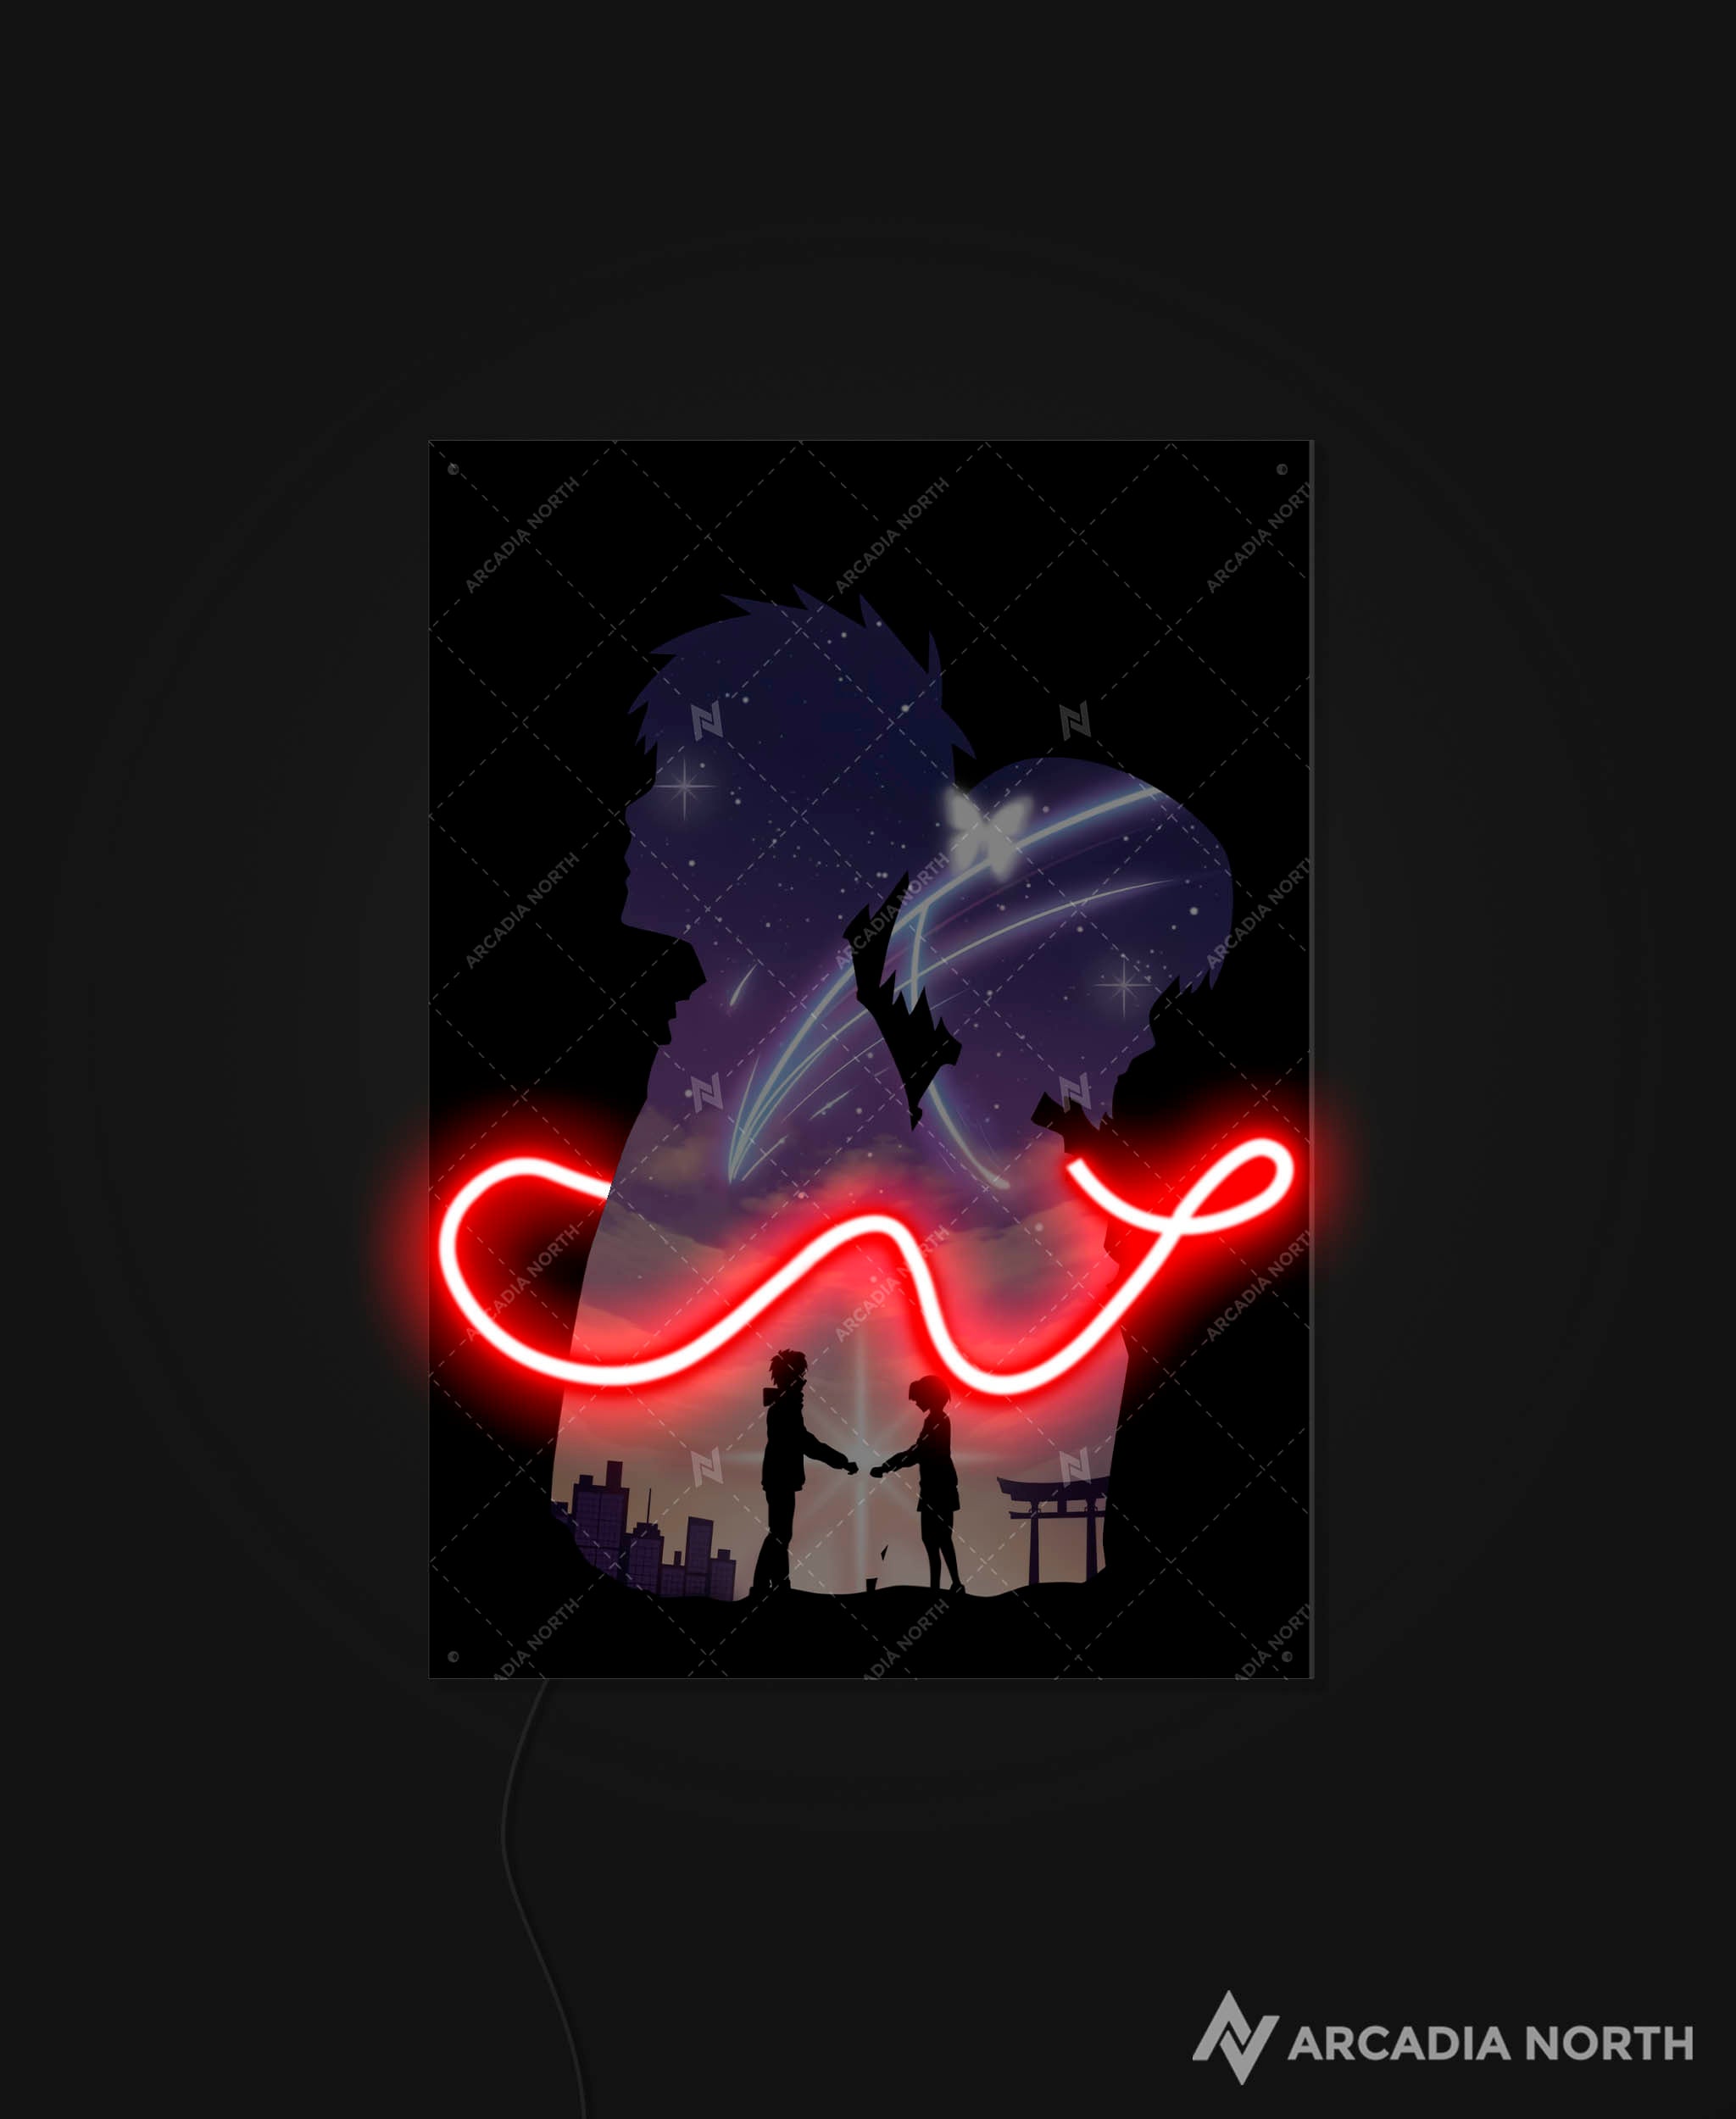 Arcadia North AURALIGHT - an LED Poster featuring the Makoto Shinkai anime Your Name Kimi no Na wa with Mitsuha and Taki connected by the red string of fate. Illuminated by glowing neon LED lights. UV-printed on acrylic.